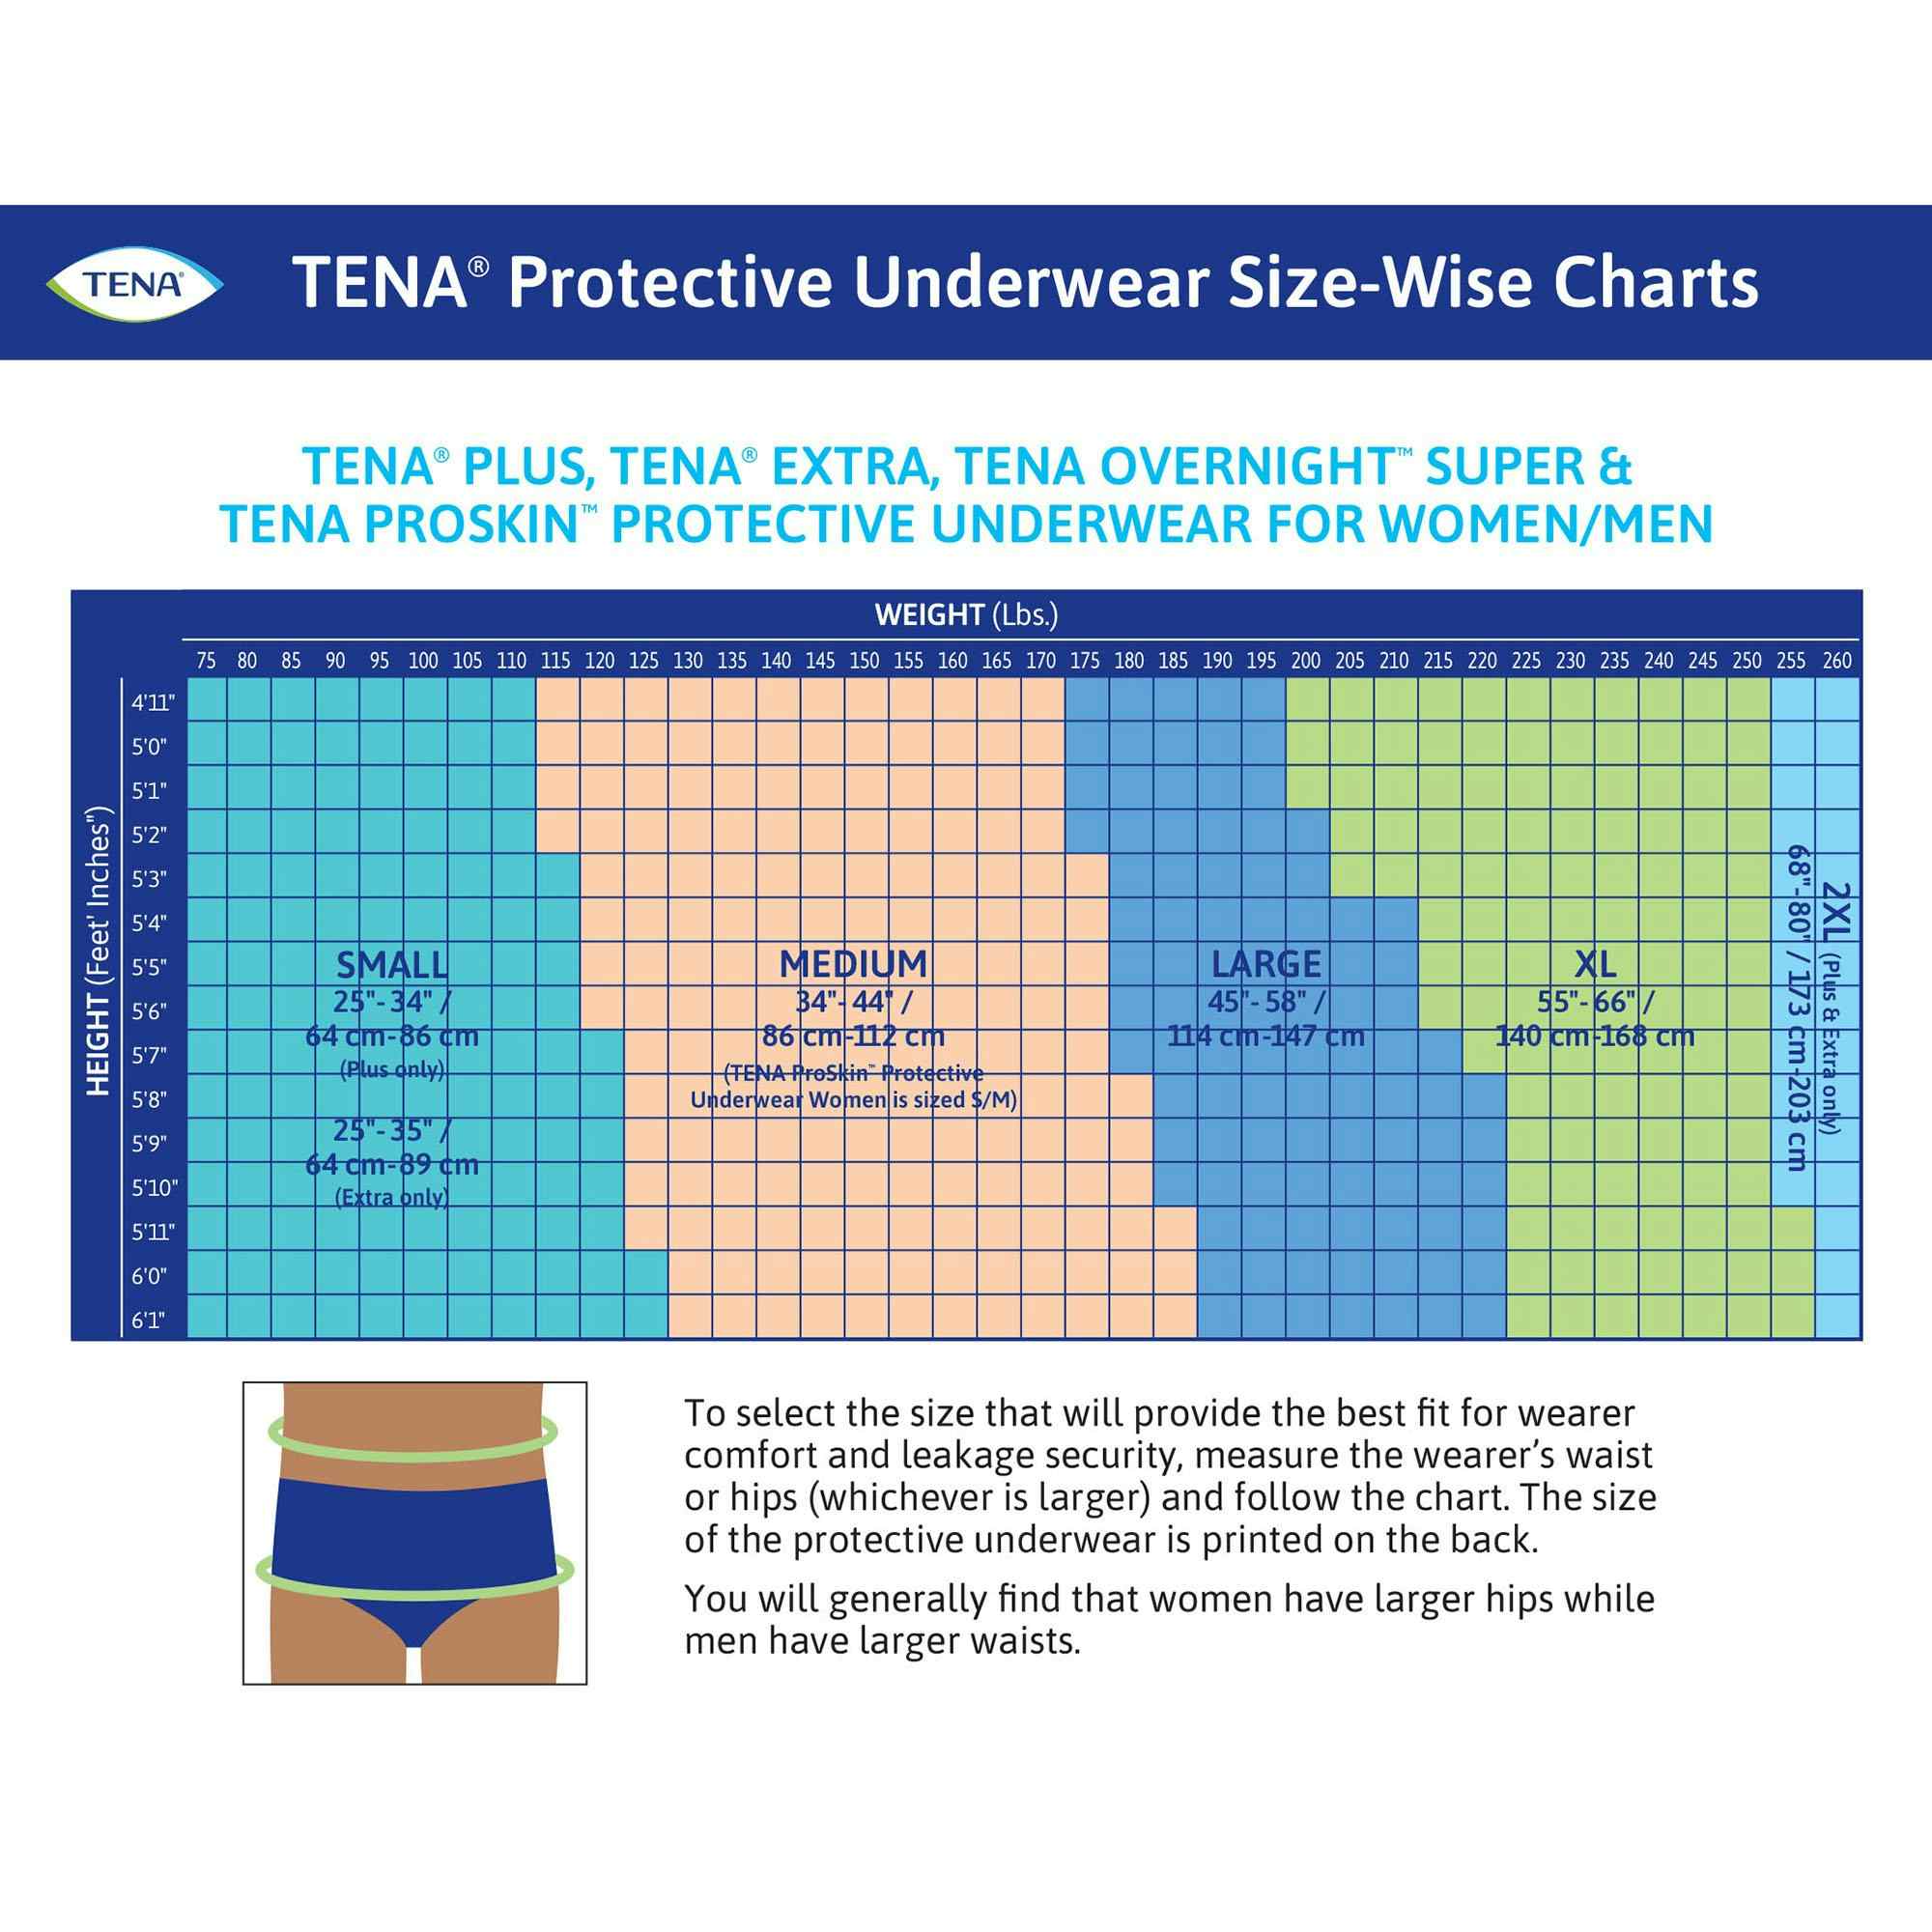 TENA Overnight Super Protective Incontinence Underwear, Overnight Absorbency